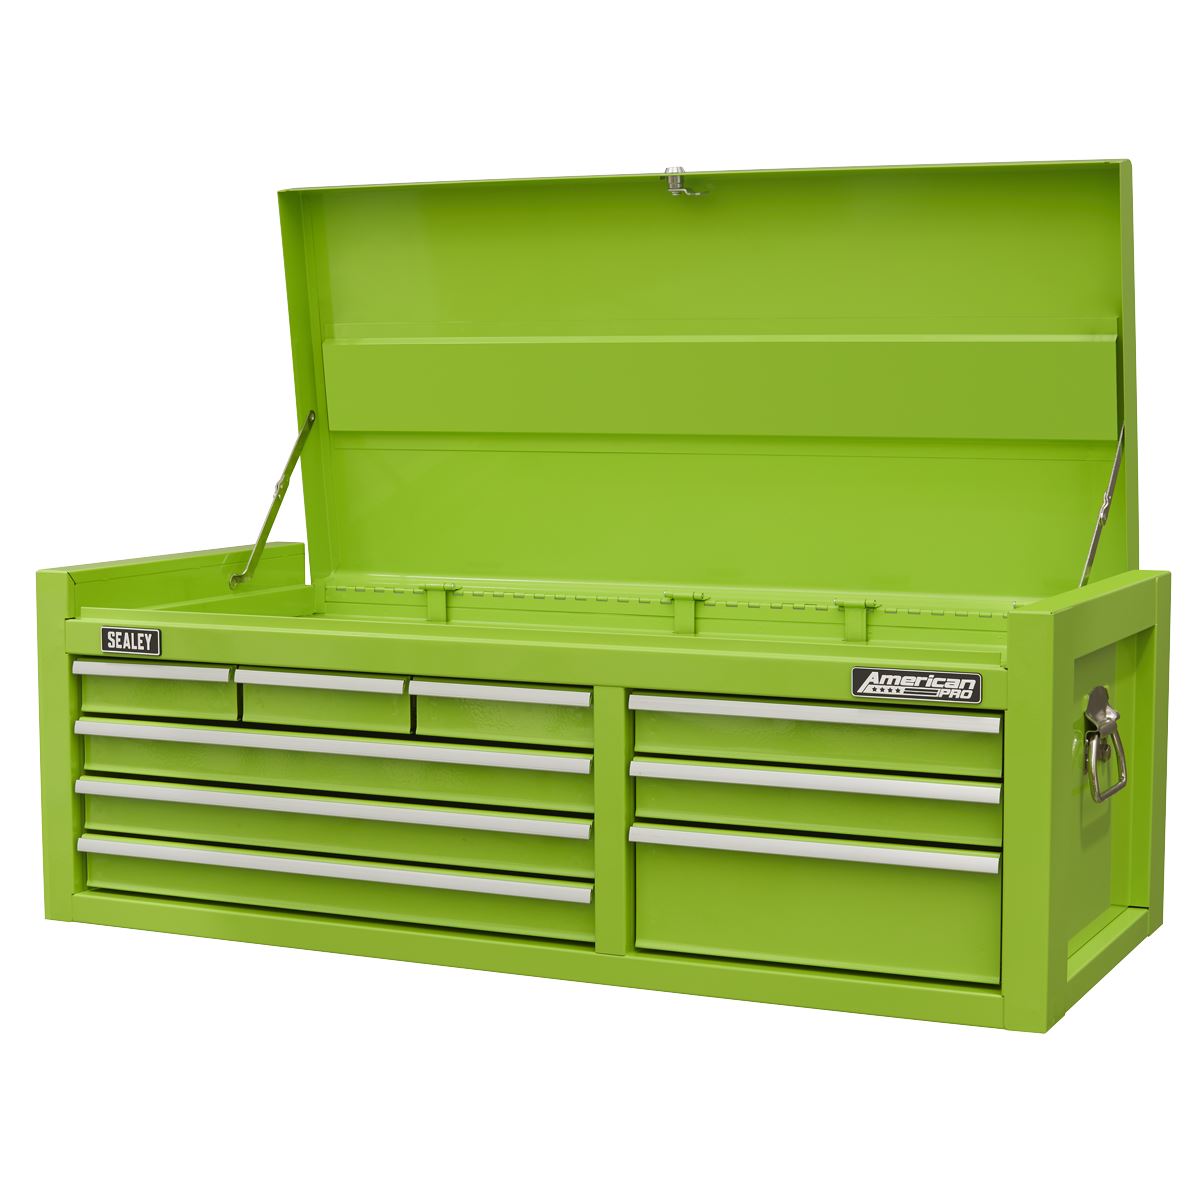 Sealey American Pro Topchest 9 Drawer with Ball Bearing Slides - Green